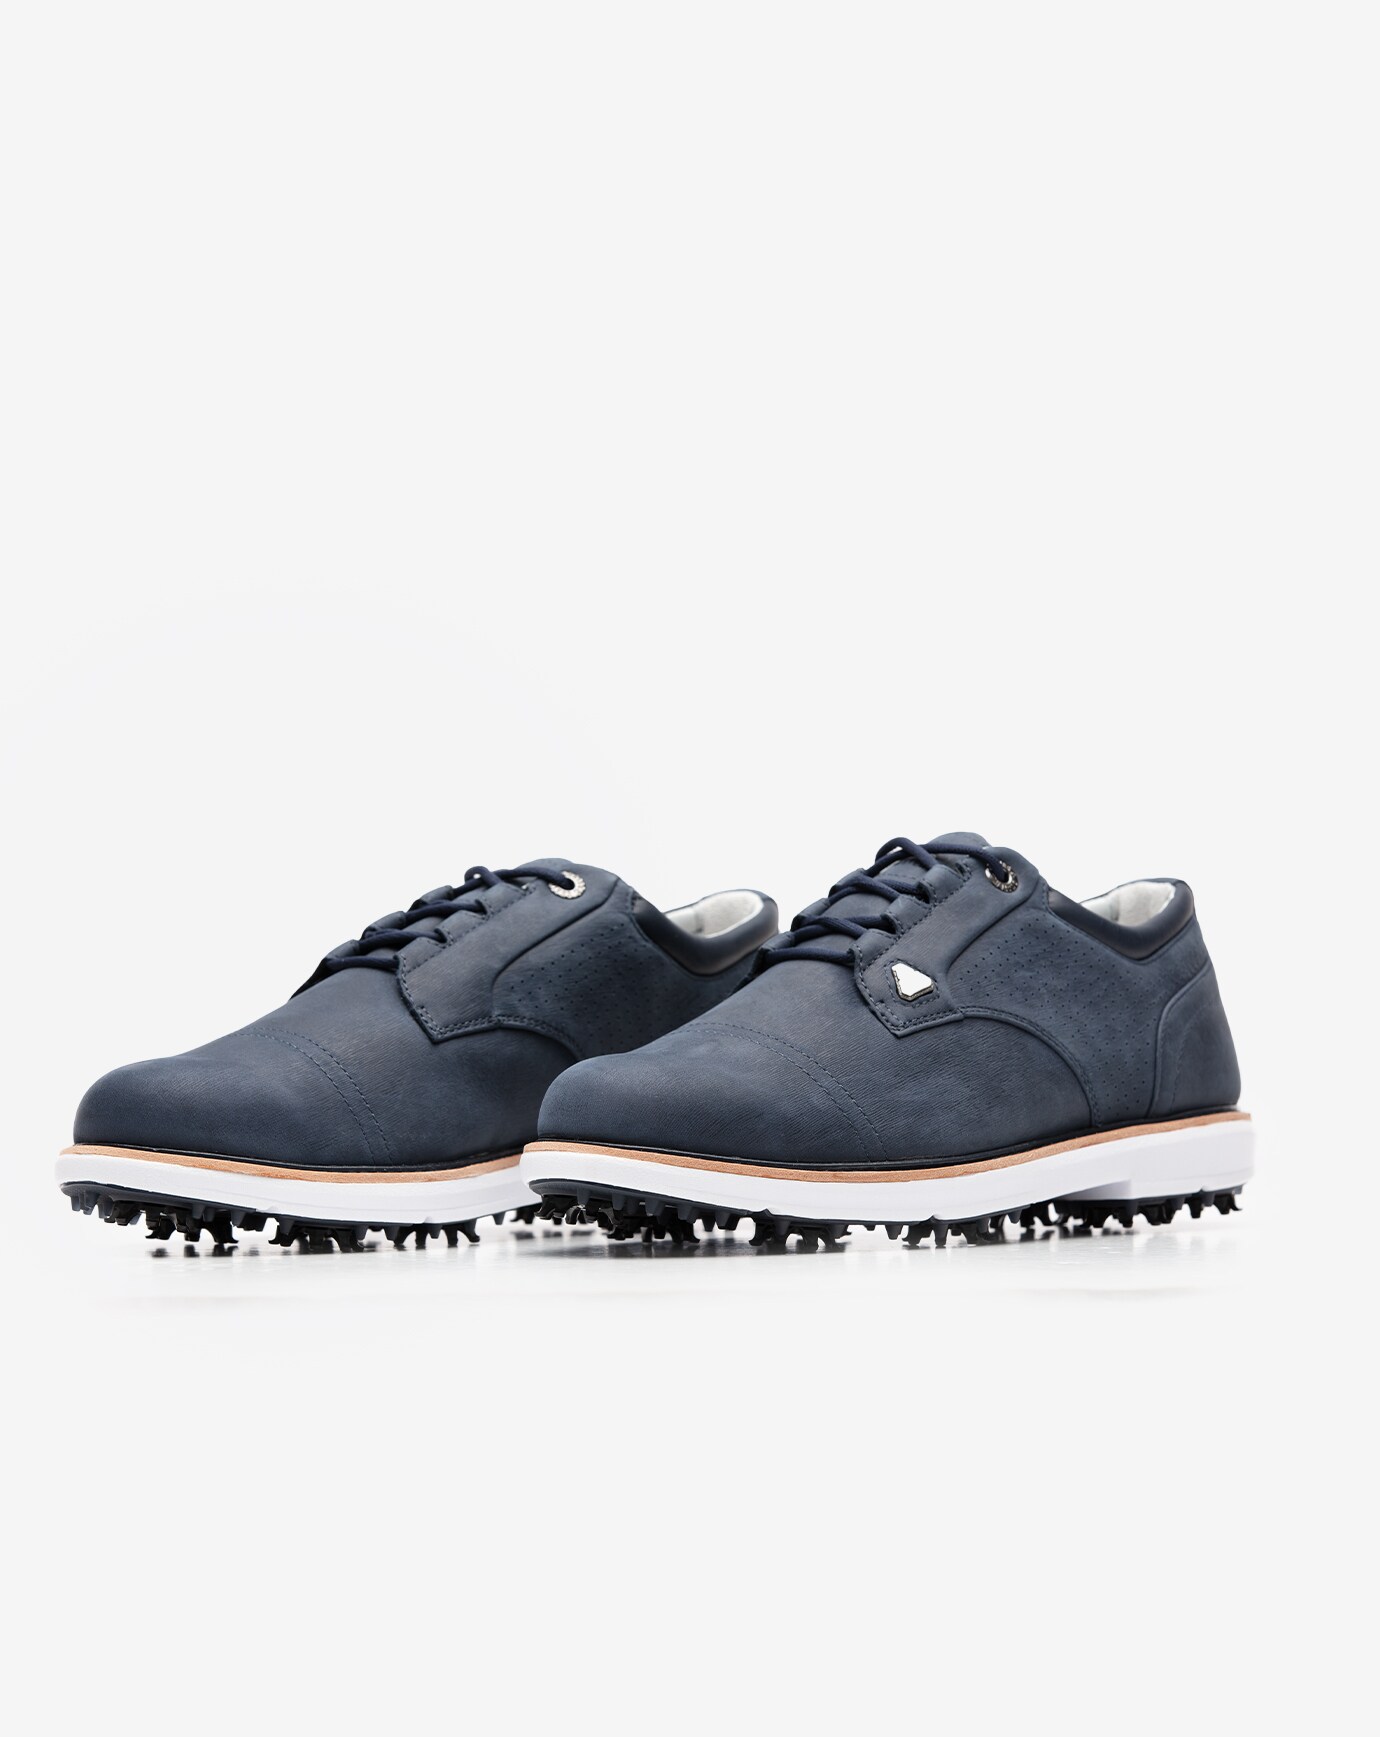 THE LEGEND SPIKED GOLF SHOE Image 5